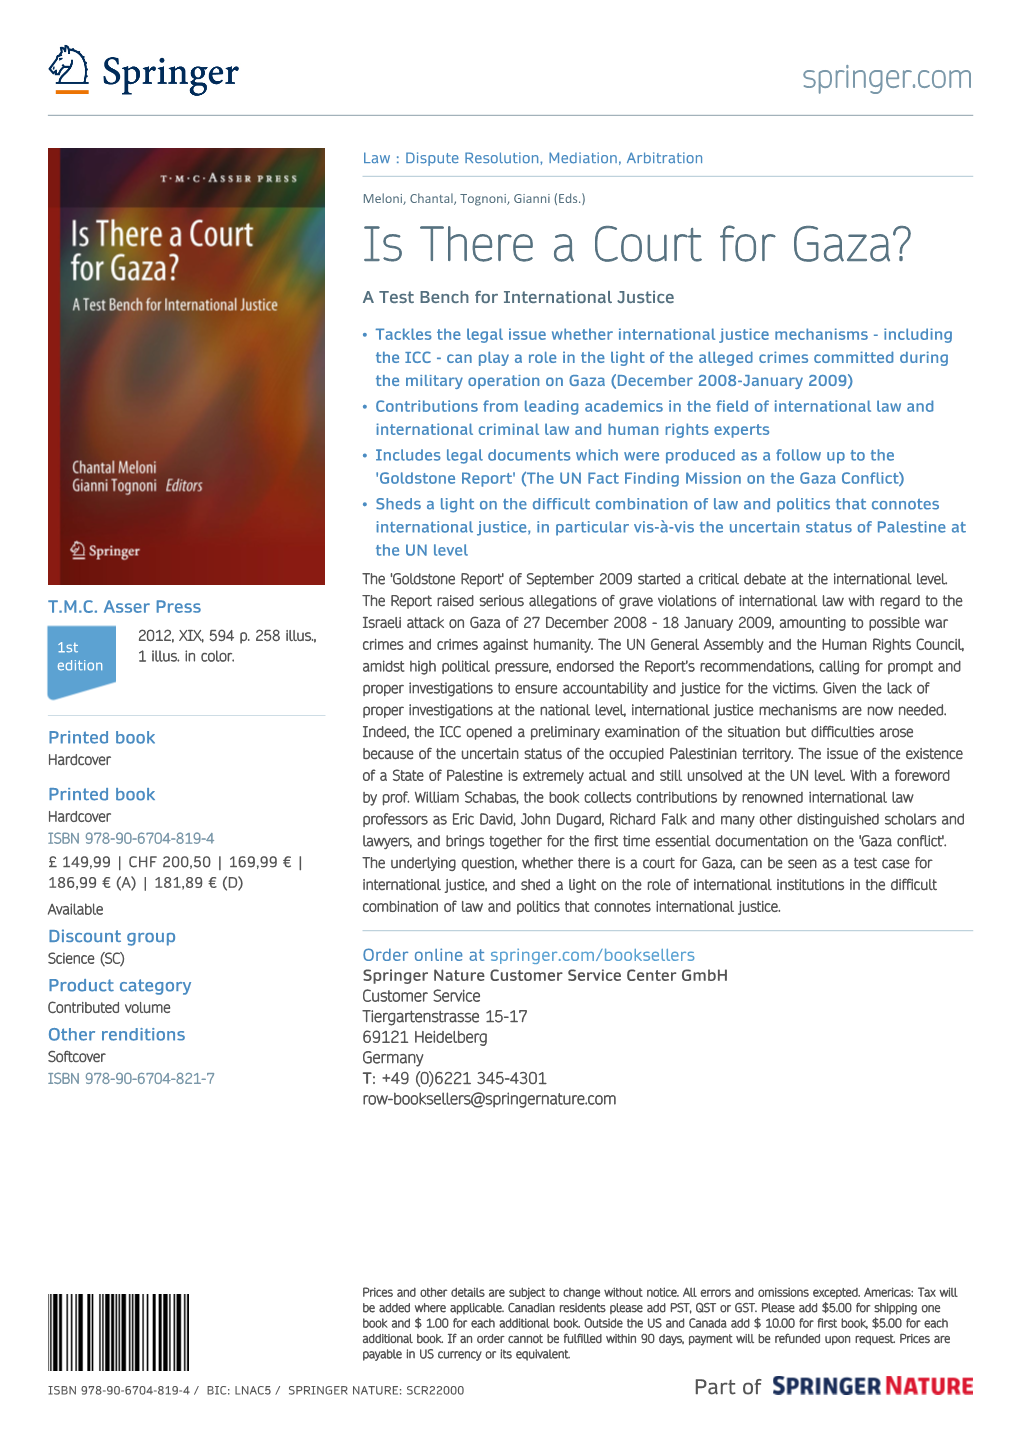 Is There a Court for Gaza? a Test Bench for International Justice